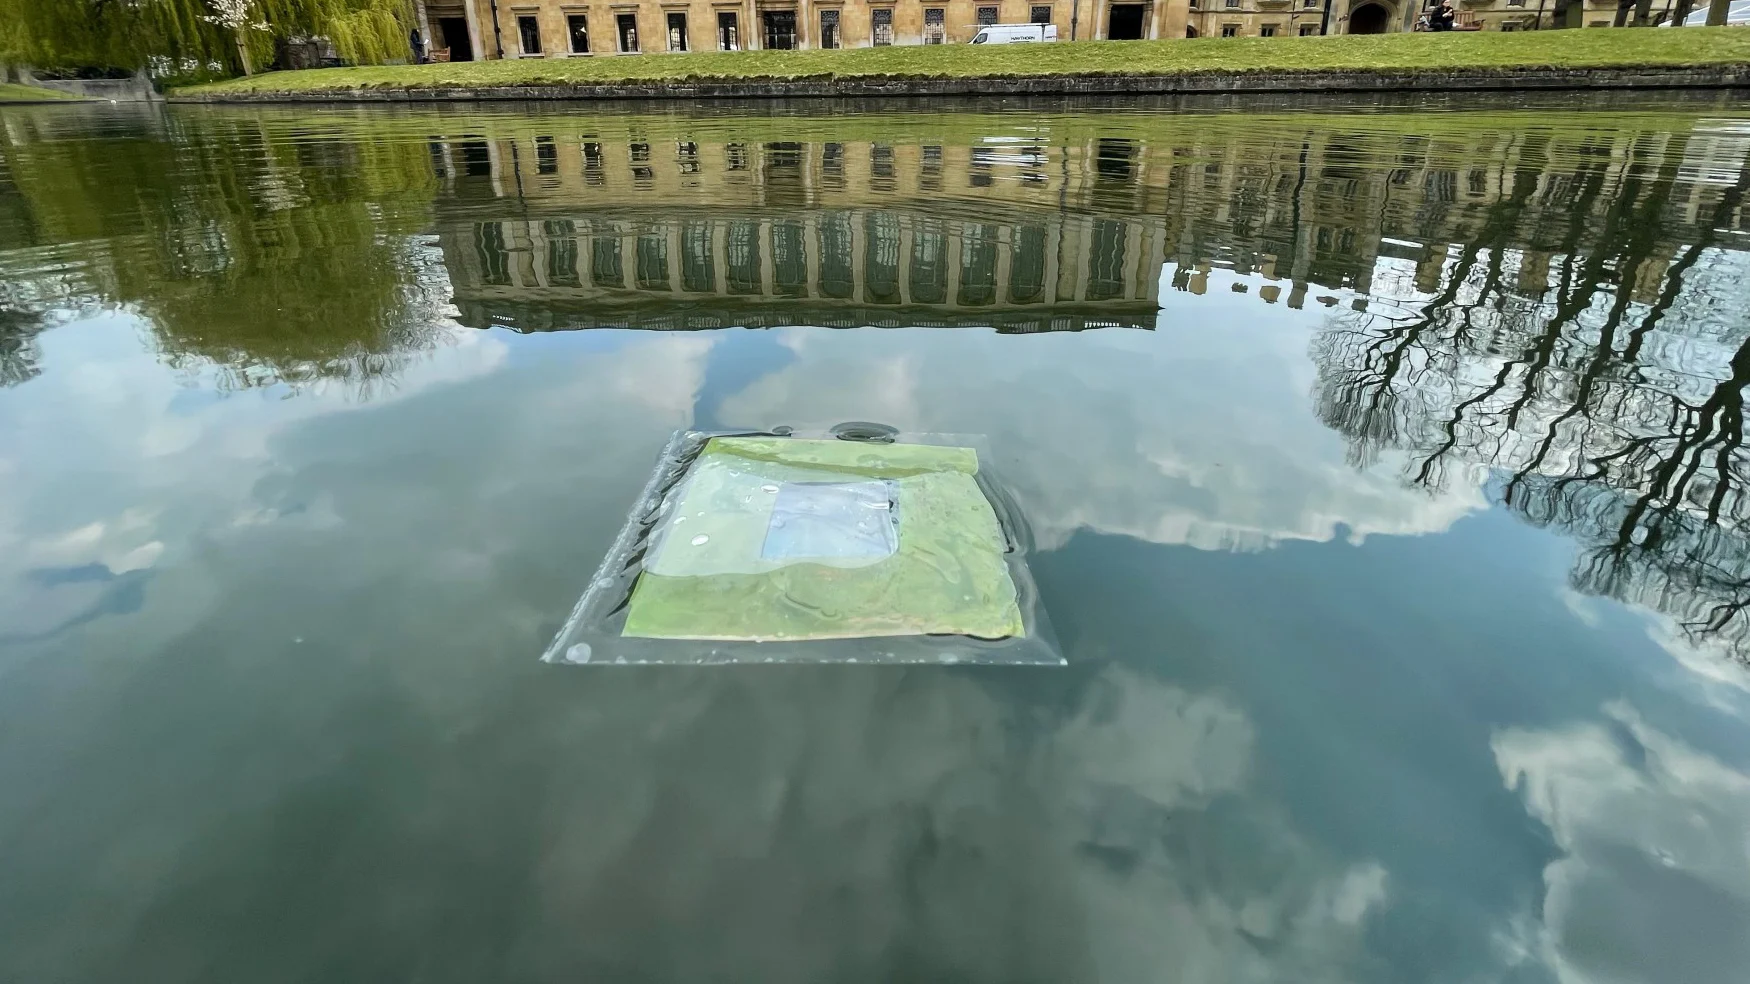 These floating artificial leaves could one day generate fuel out at sea